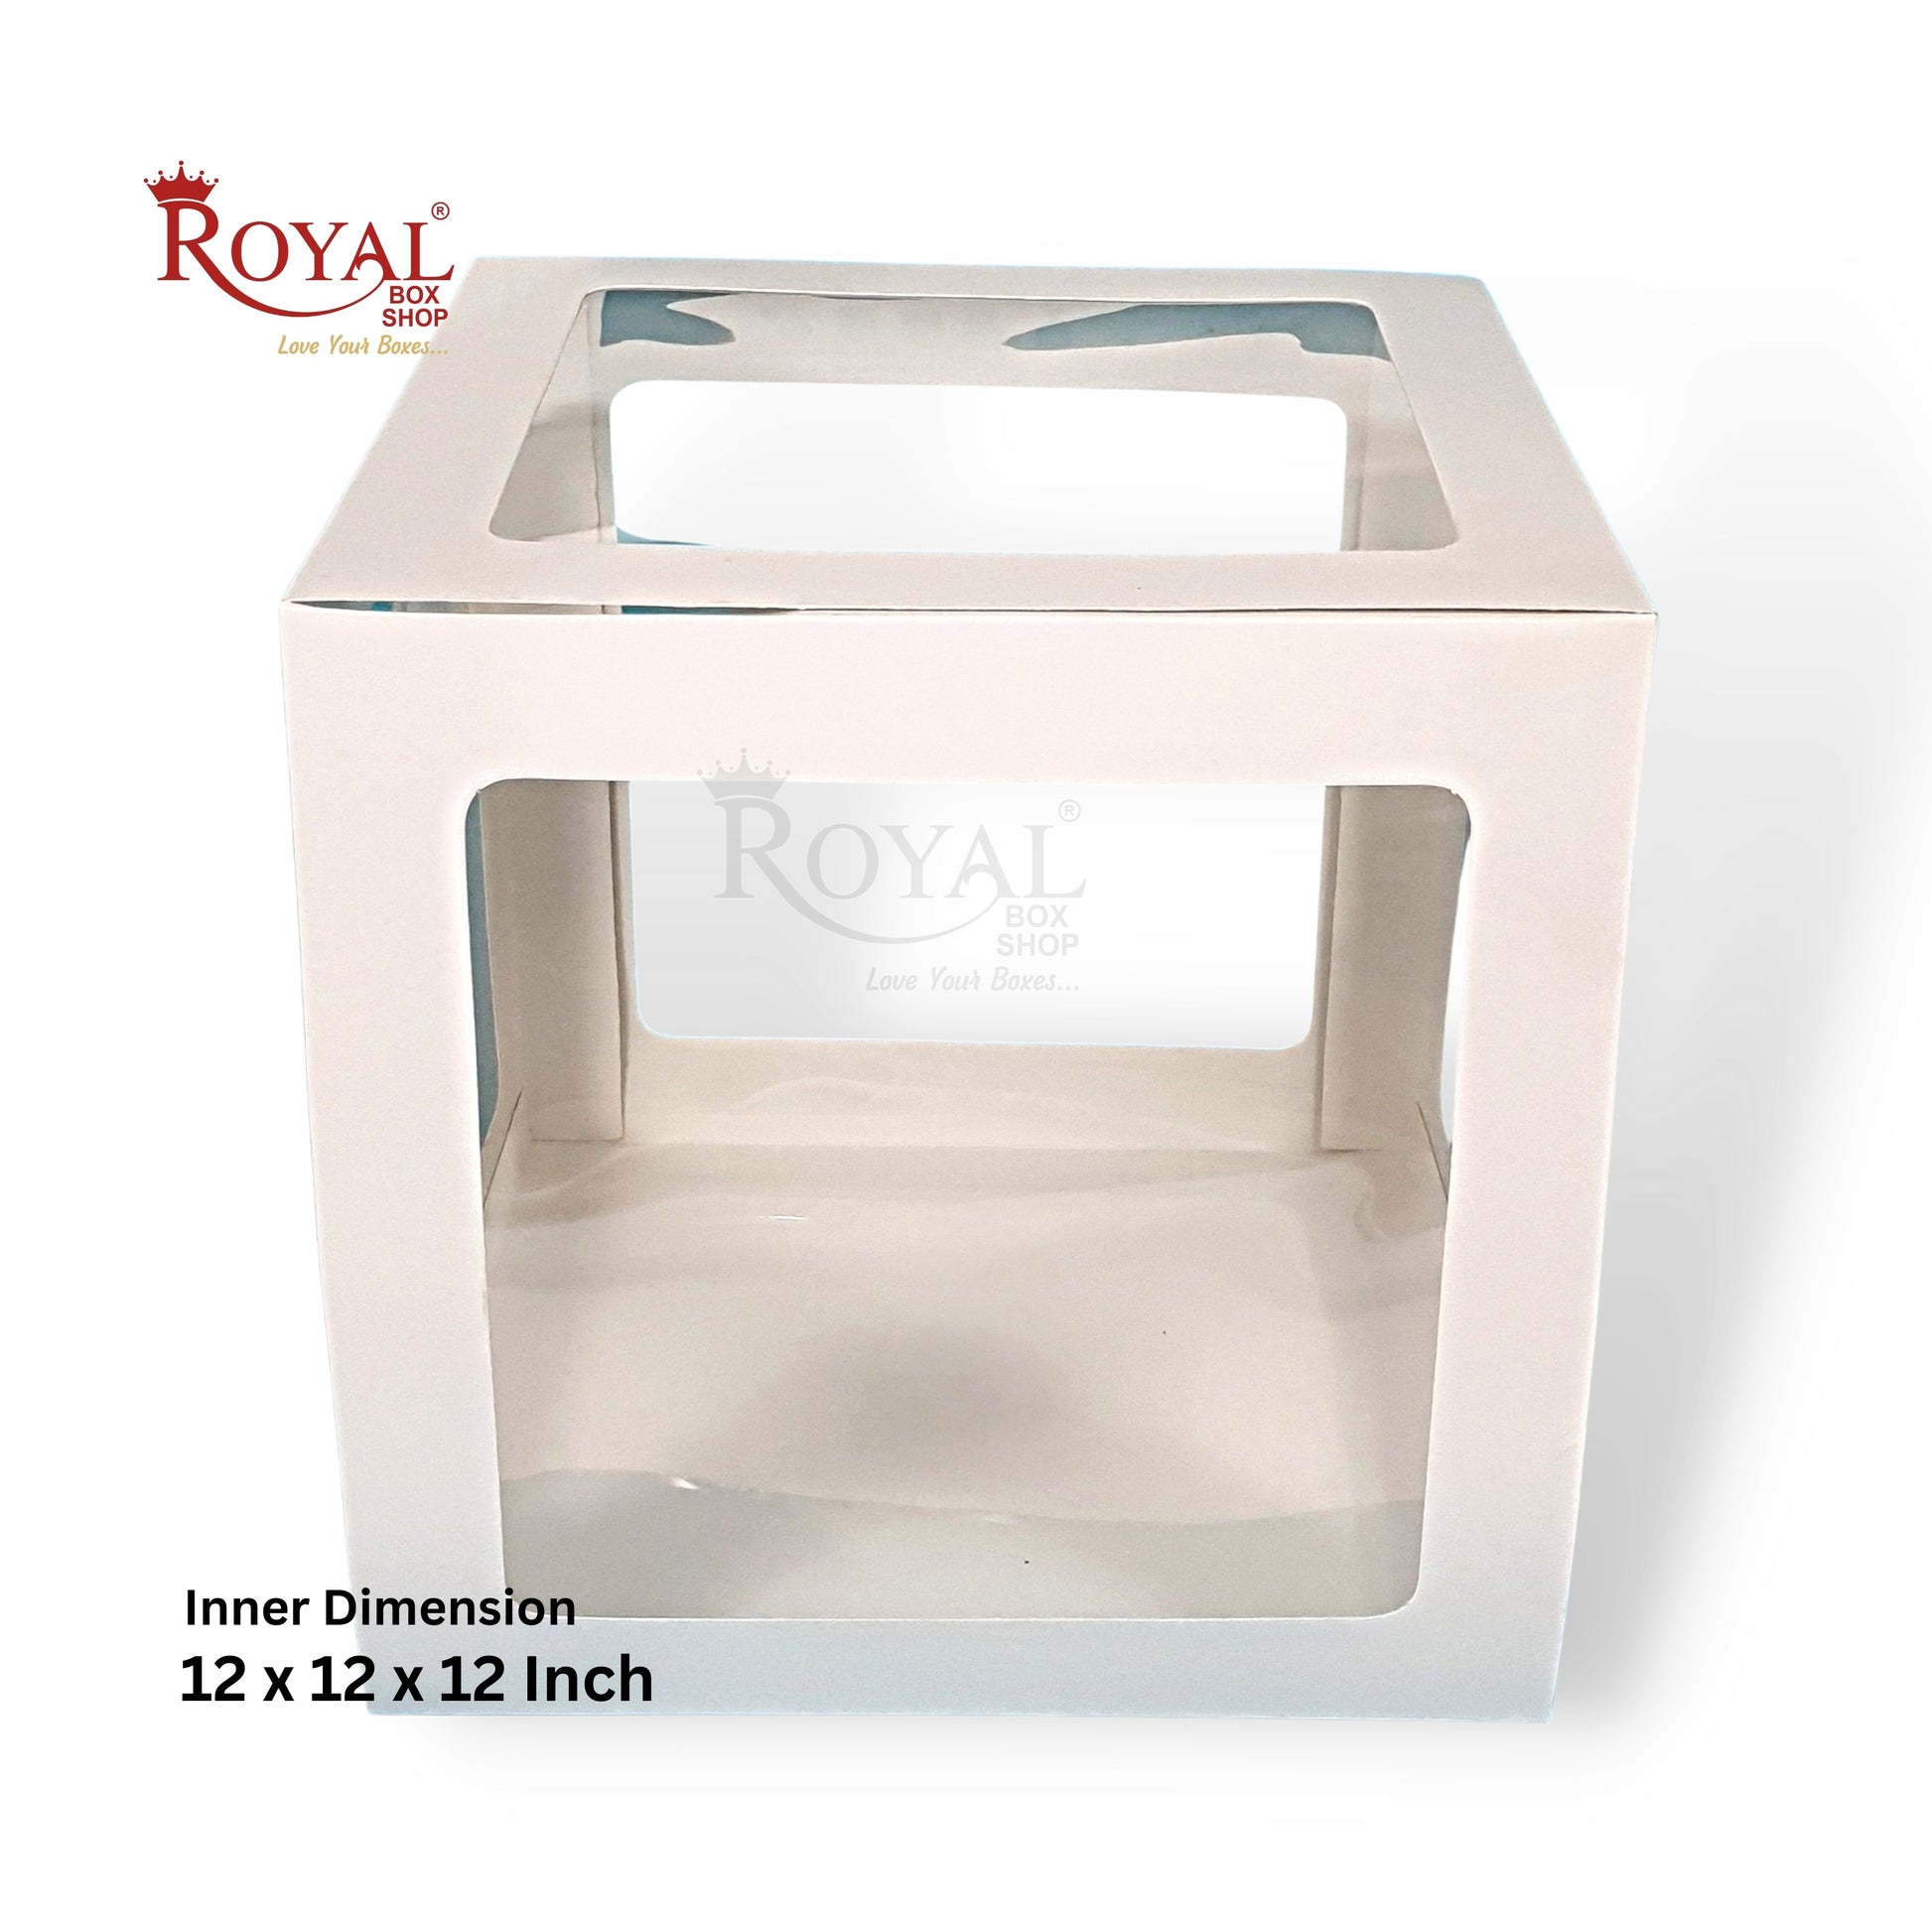 RoyalBoxShop® 5-Window Gift Box I 12x12x12 Inch I White I Perfect for Bakery Cakes, Gifts, Parties, Any Occasion Royal Box Shop